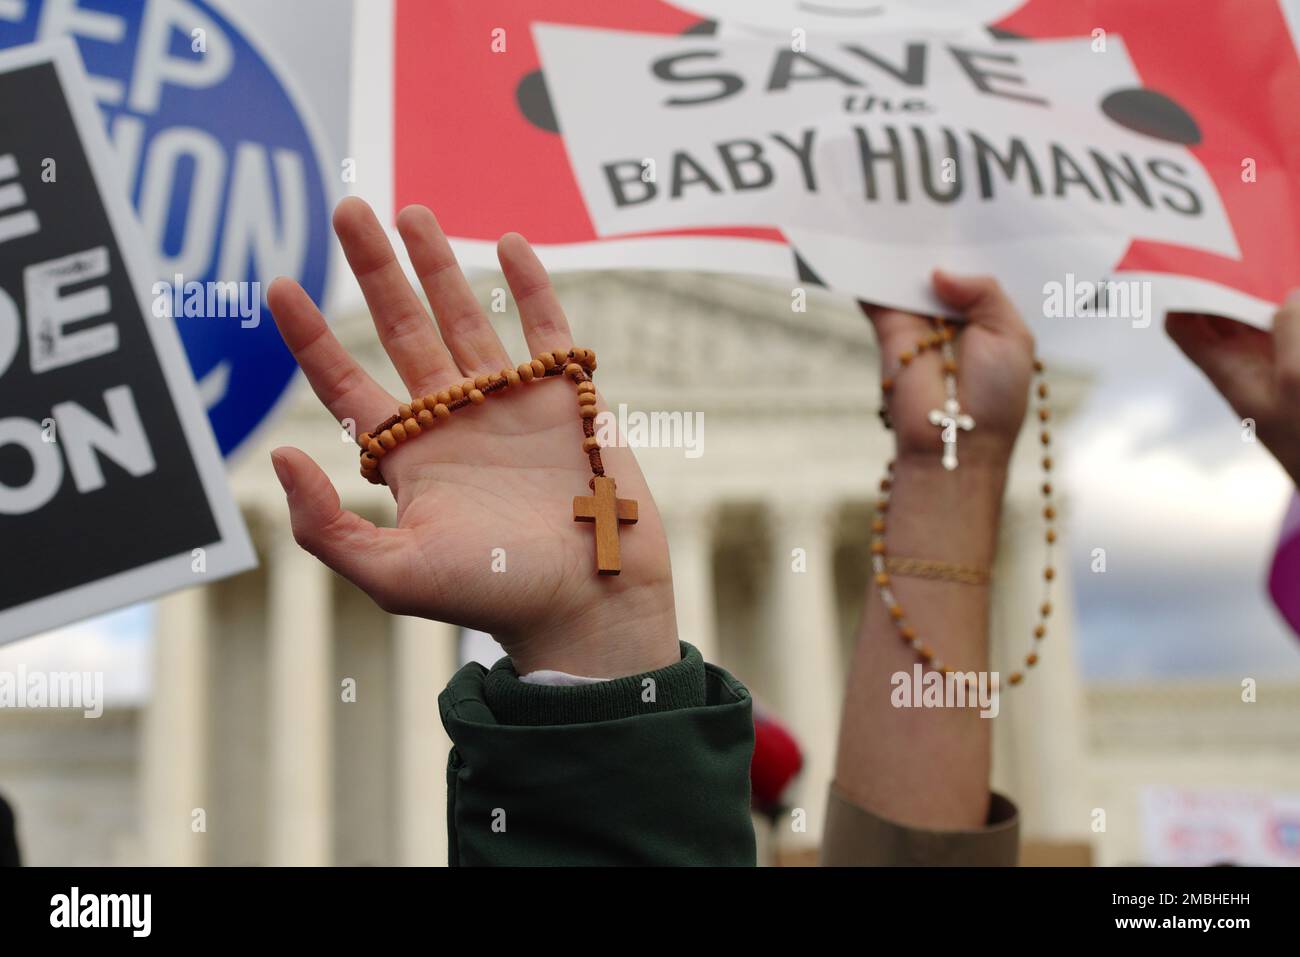 Washington DC, USA. 20 Jan 2023. Pro-life protesters hold up signs and rosaries at the annual March for Life antiabortion demonstration, the first since Roe v. Wade was overturned in June 2022. Credit: Philip Yabut/Alamy Live News Stock Photo